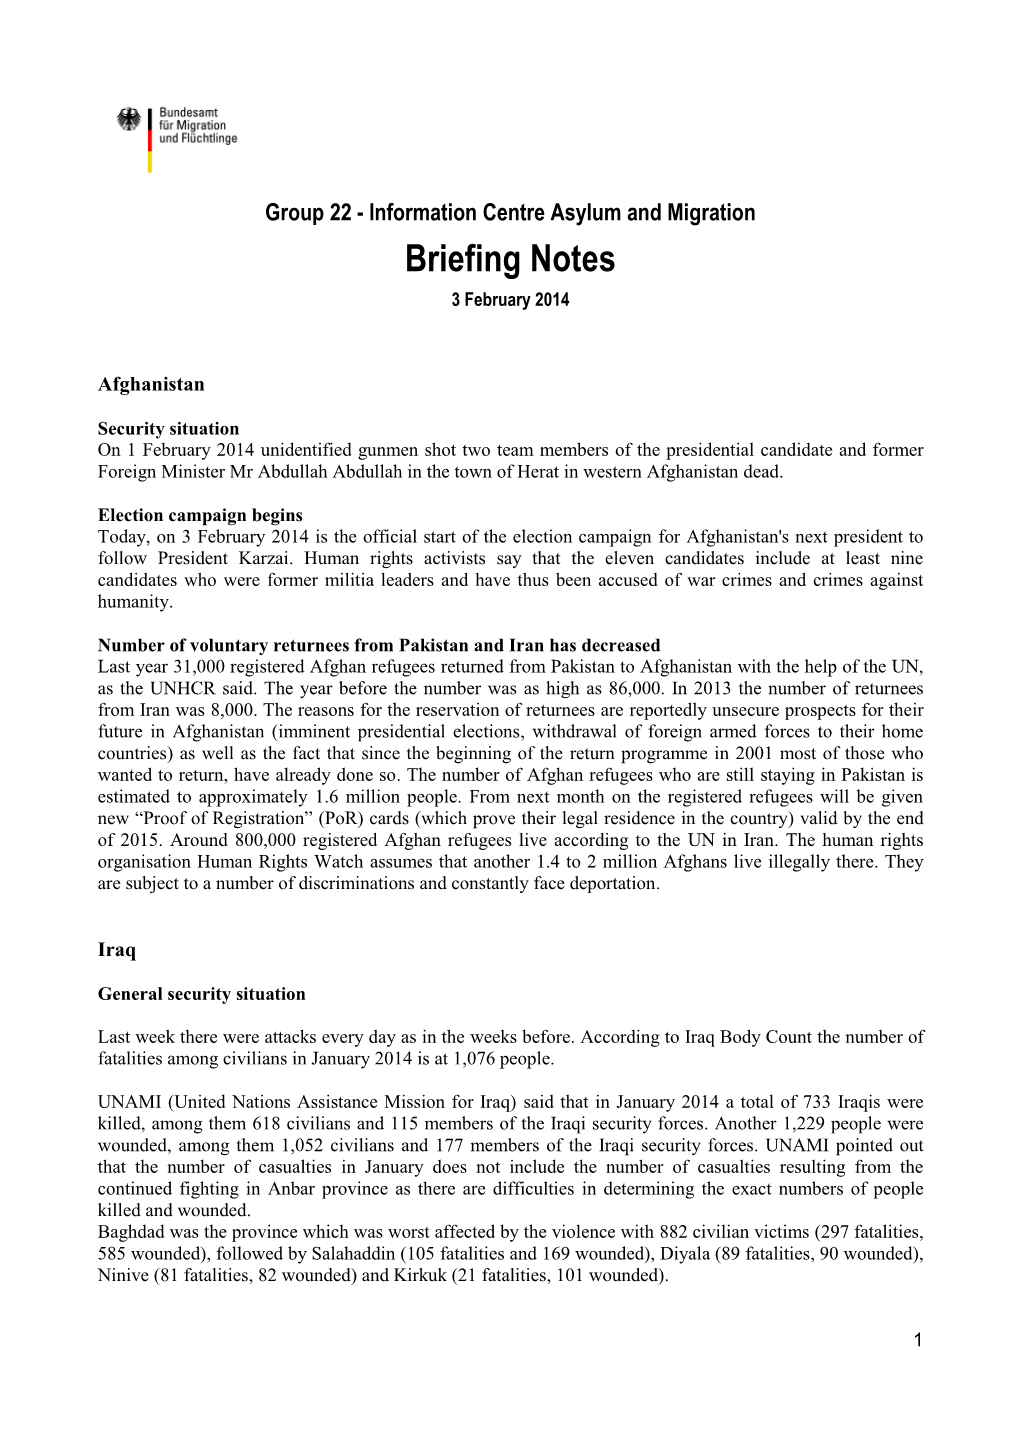 Briefing Notes 3 February 2014